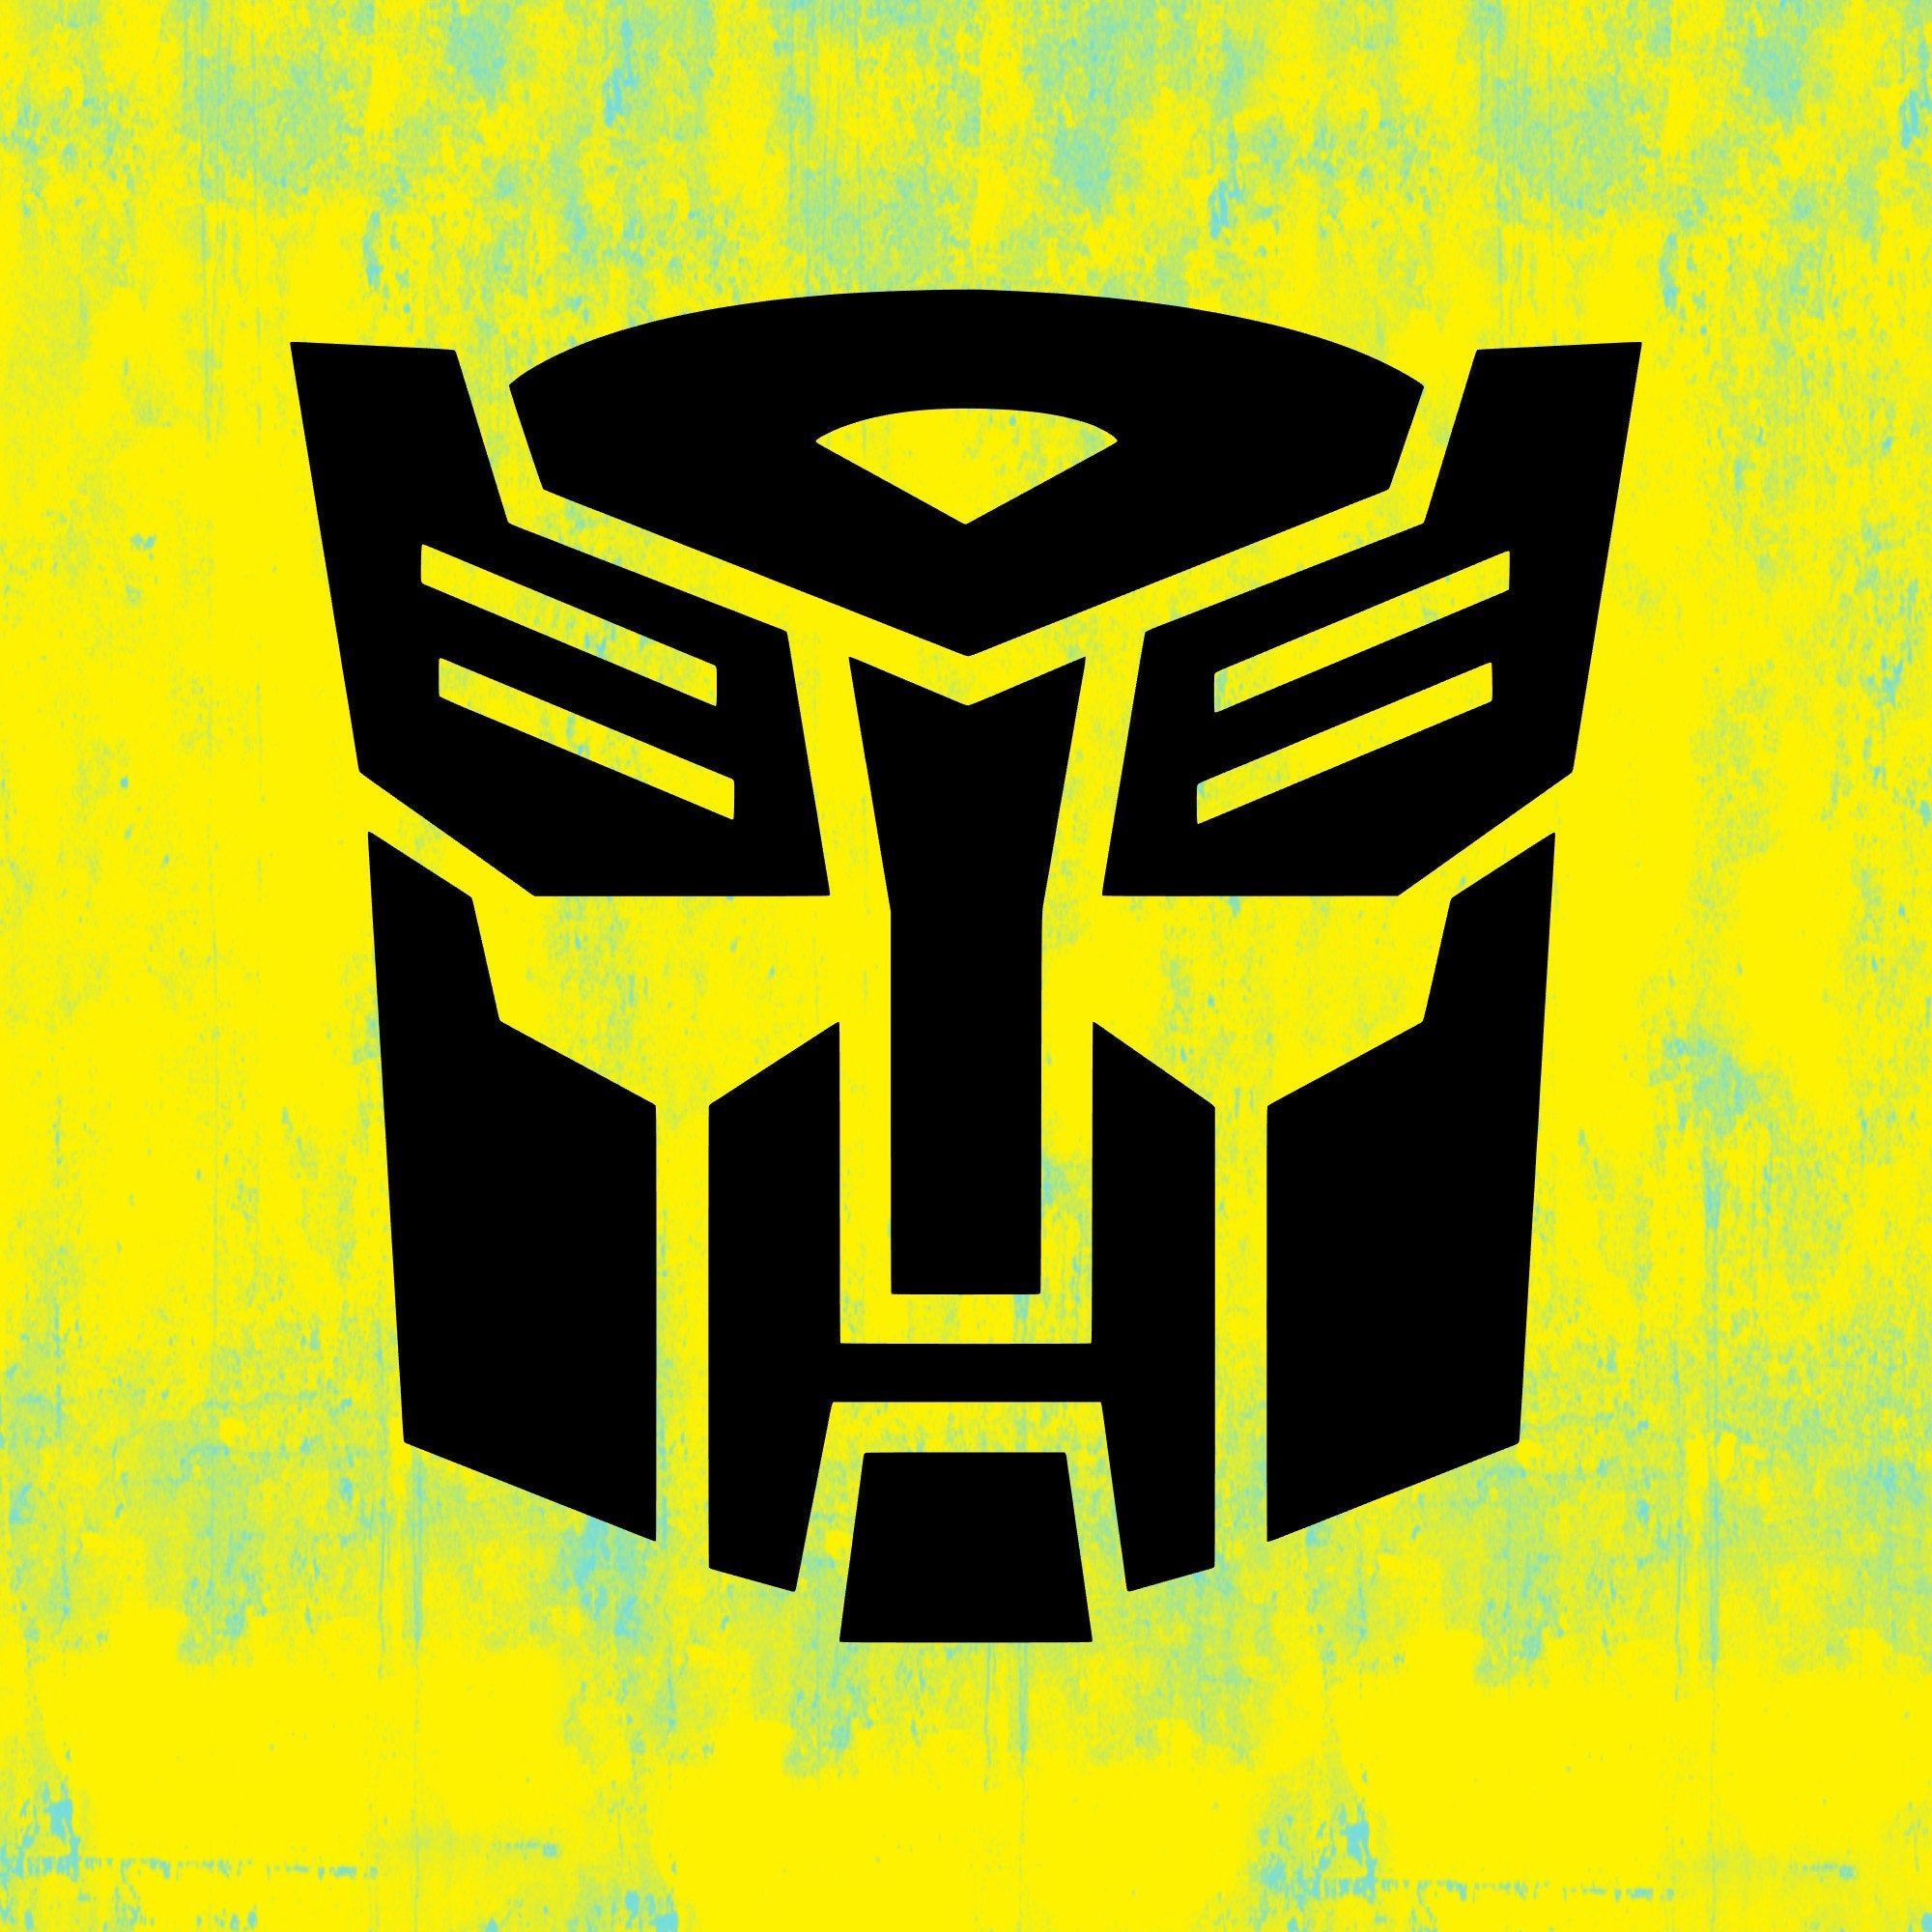 Transformers Autobot Decal. Car Decal. Yeti Decal. Tumbler Decal. Laptop Decal by LaughingOwlDecals on E. Bumblebee wallpaper, Transformers cars, Transformers